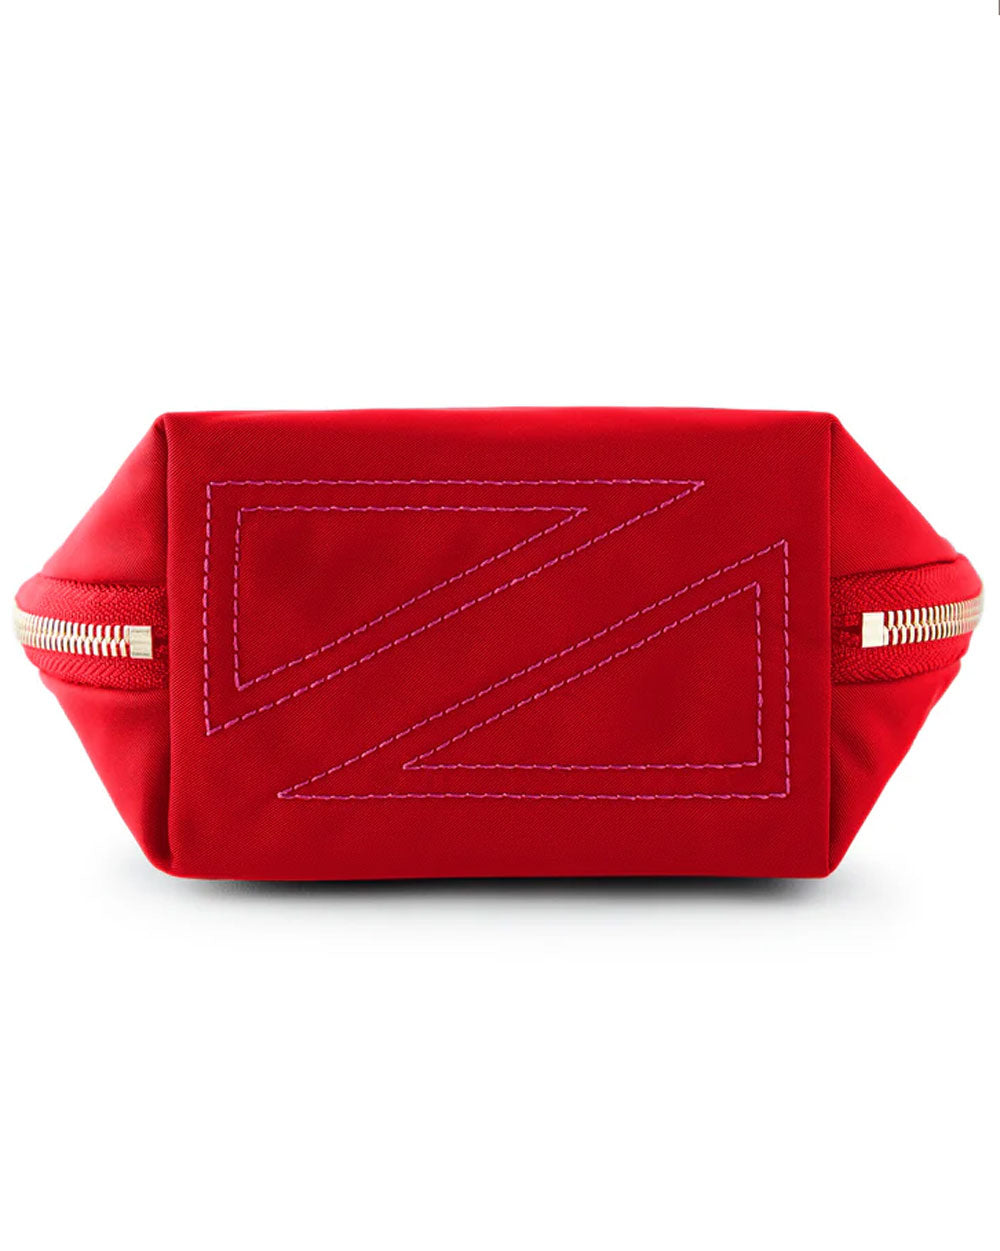 Small Everyday Makeup Bag in Red and Pink